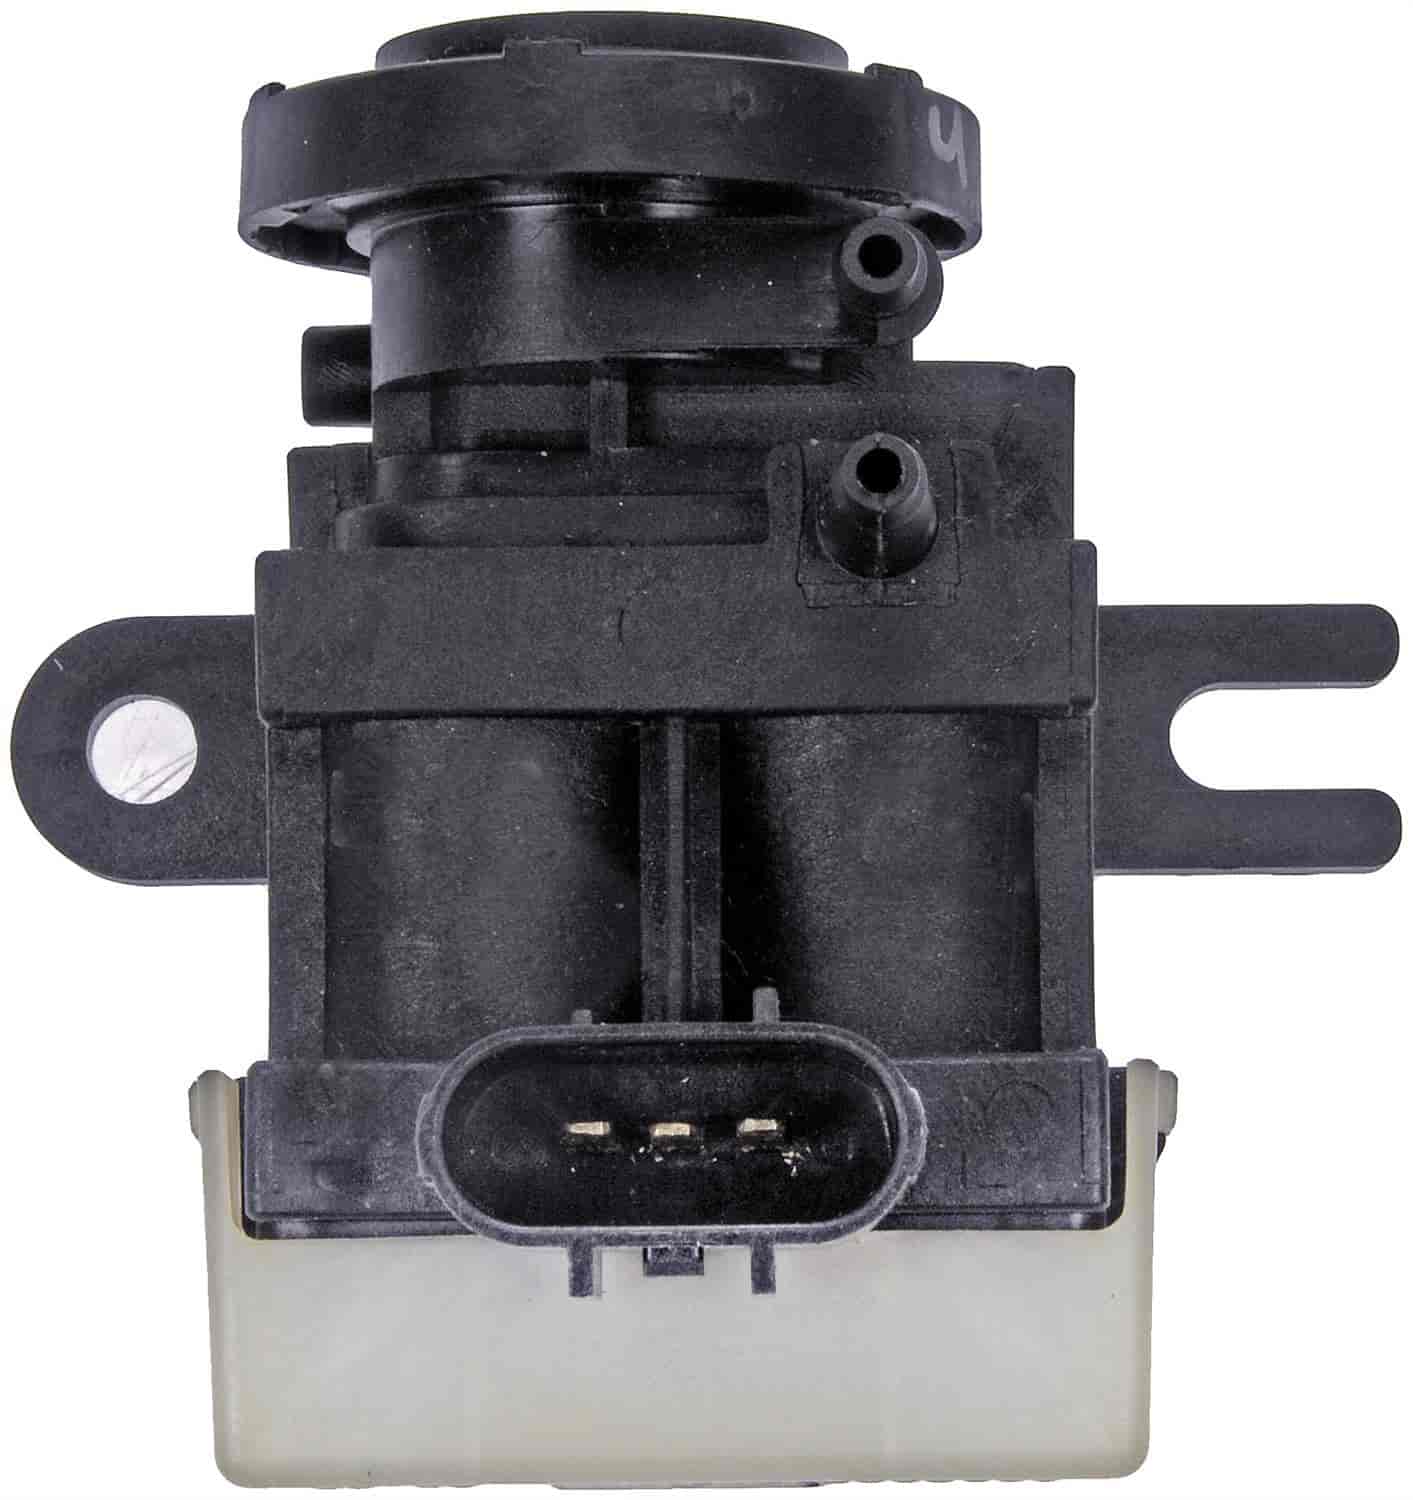 4WD Differential Switch 1999-2010 Ford